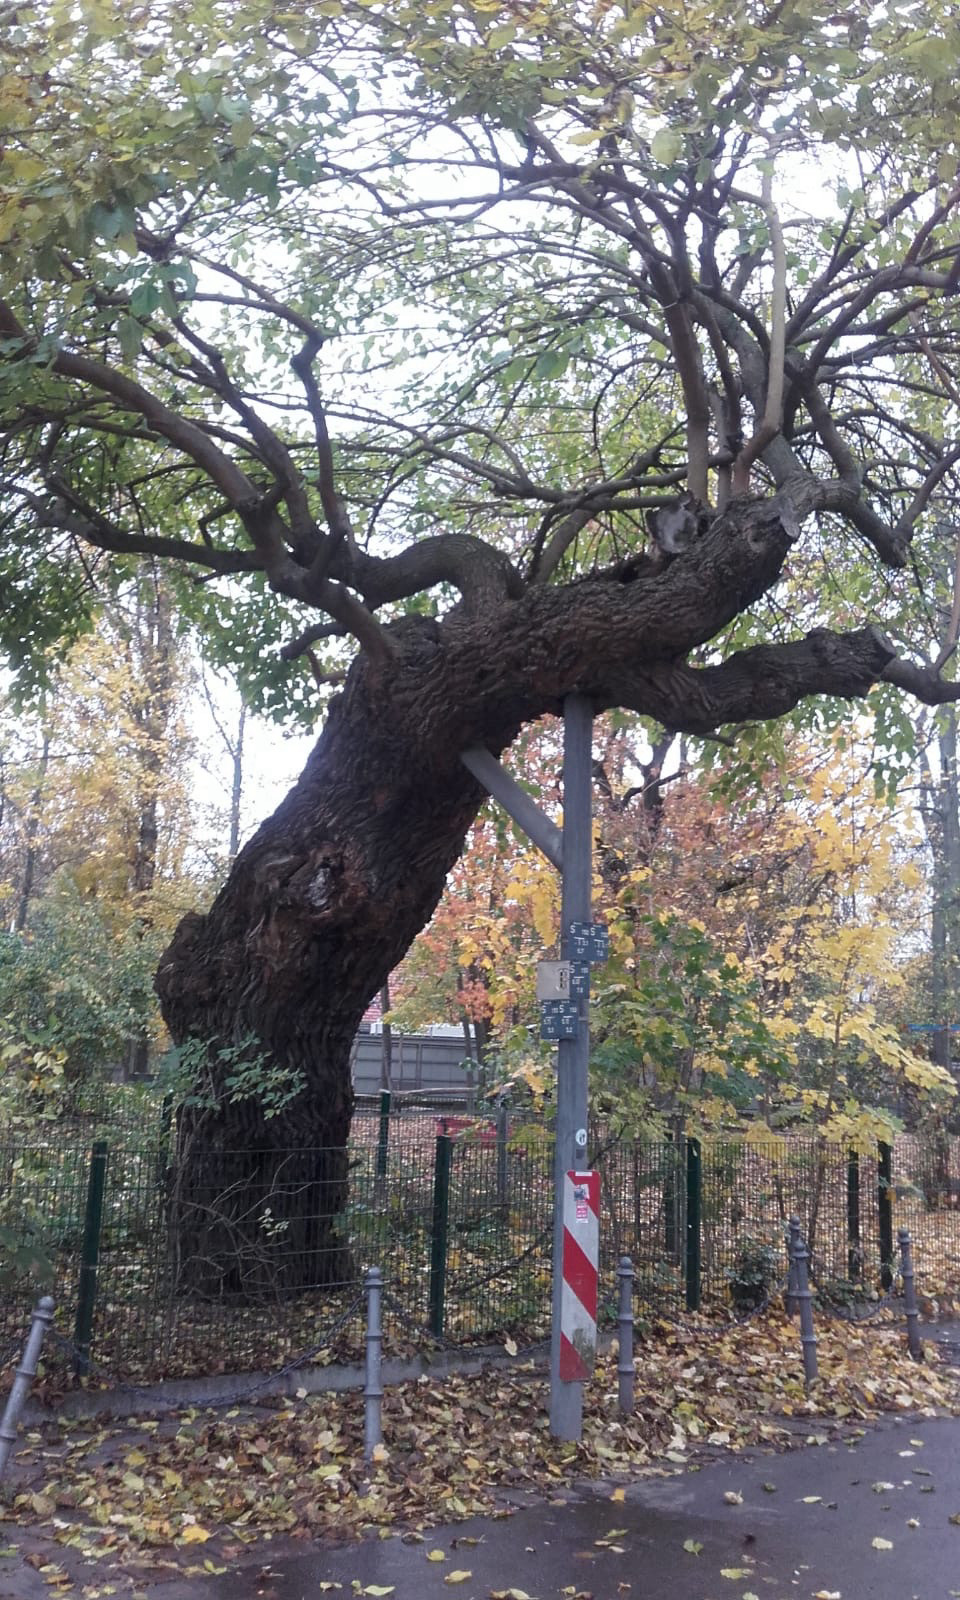 View from below of the thinning canopy of a large deciduous tree, whose crooked trunk is being held up by a metal pillar with a red-and-white safety marker anchored in the ground. Autumn foliage lies all around.